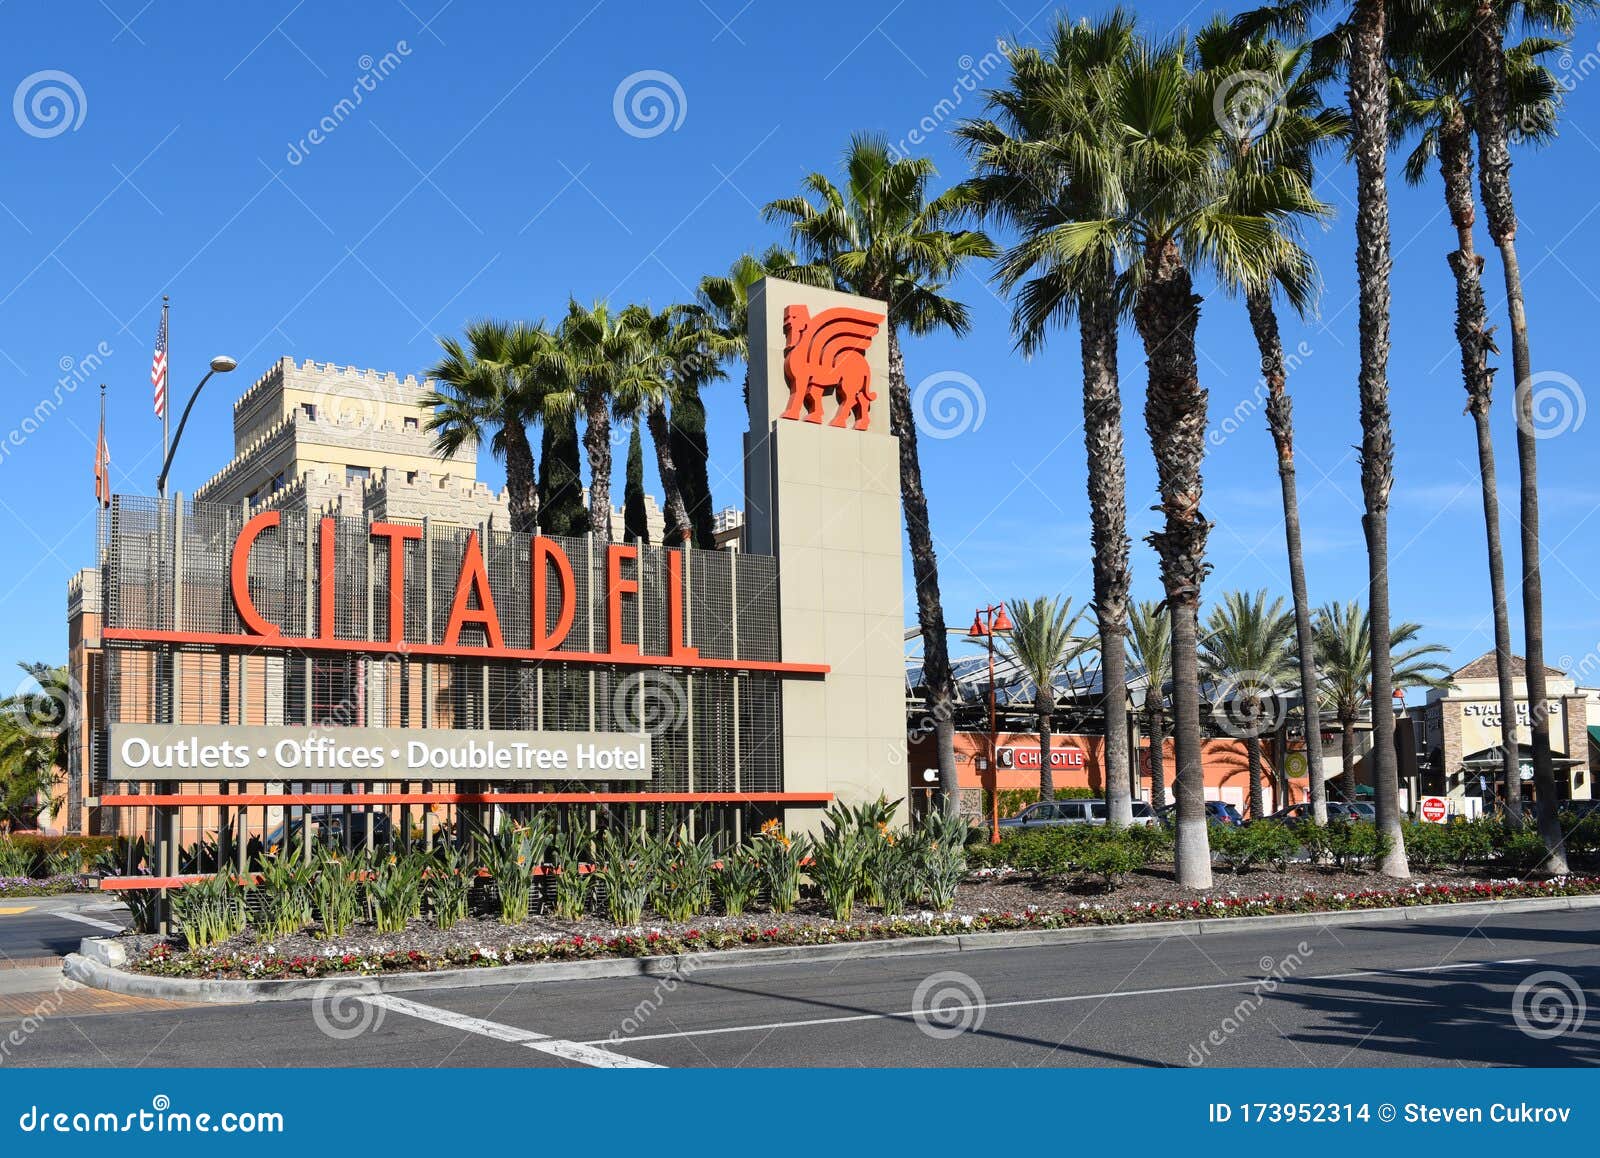 COMMERCE, CALIFORNIA - 26 FEB 2020: Citadel Outlet Mall Sign. Los Angeles Only Outlet Shopping ...